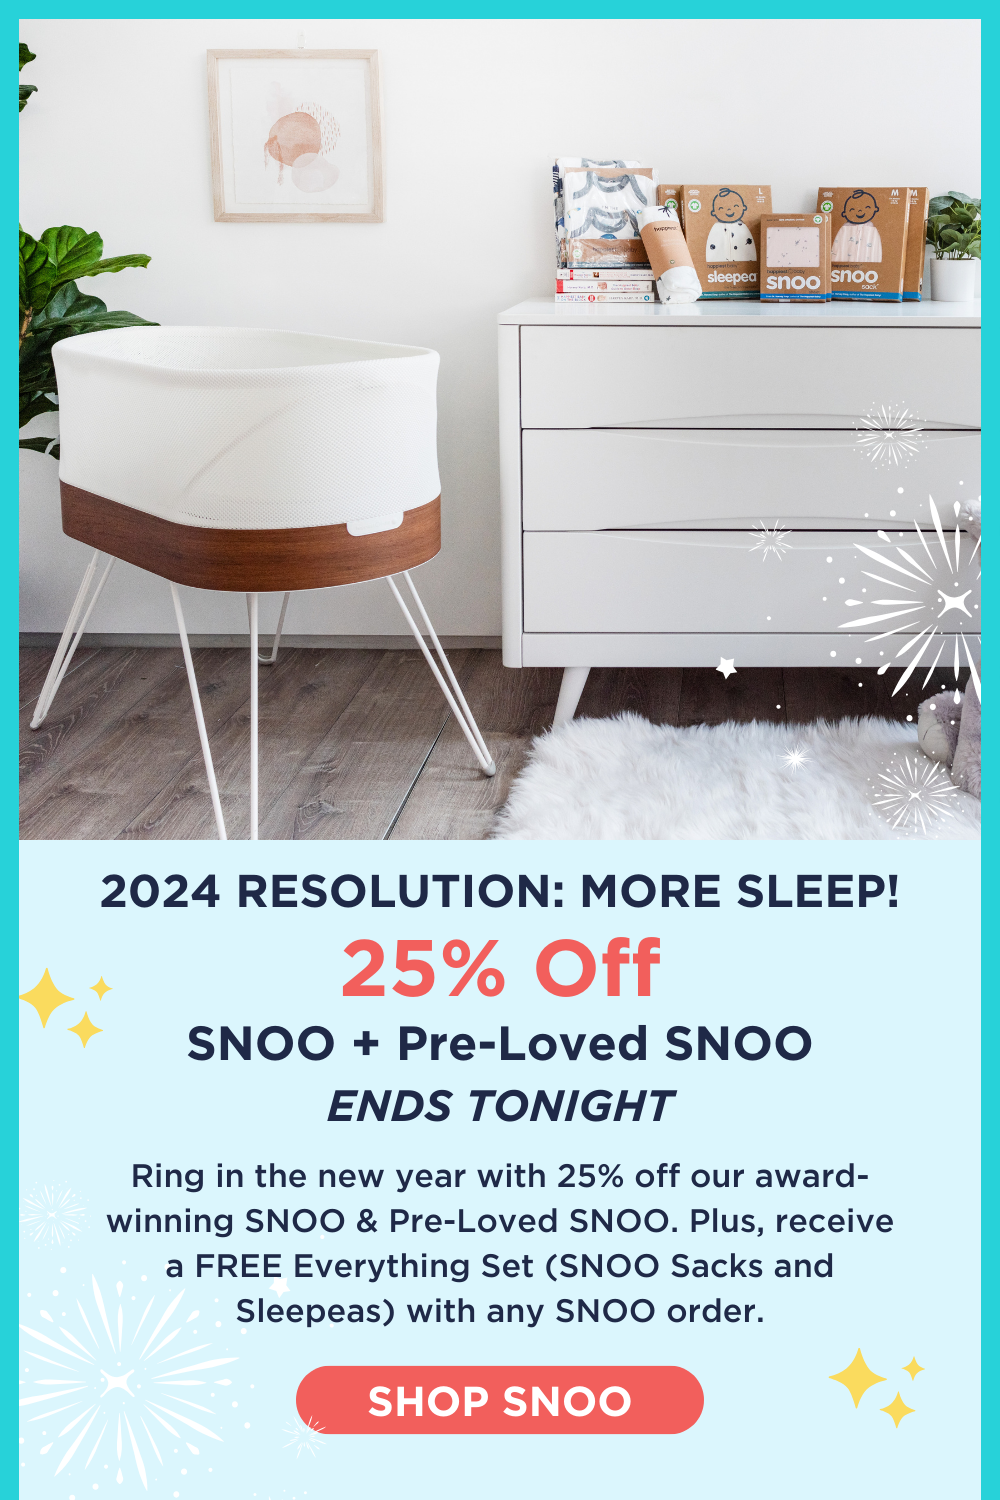 2024 RESOLUTION: MORE SLEEP! 25% Off SNOO + Pre-Loved SNOO ENDS TONIGHT. Ring in the new year with 25% off our award-winning SNOO & Pre-Loved SNOO. Plus, receive a FREE Everything Set (SNOO Sacks and Sleepeas) with any SNOO order. SHOP SNOO